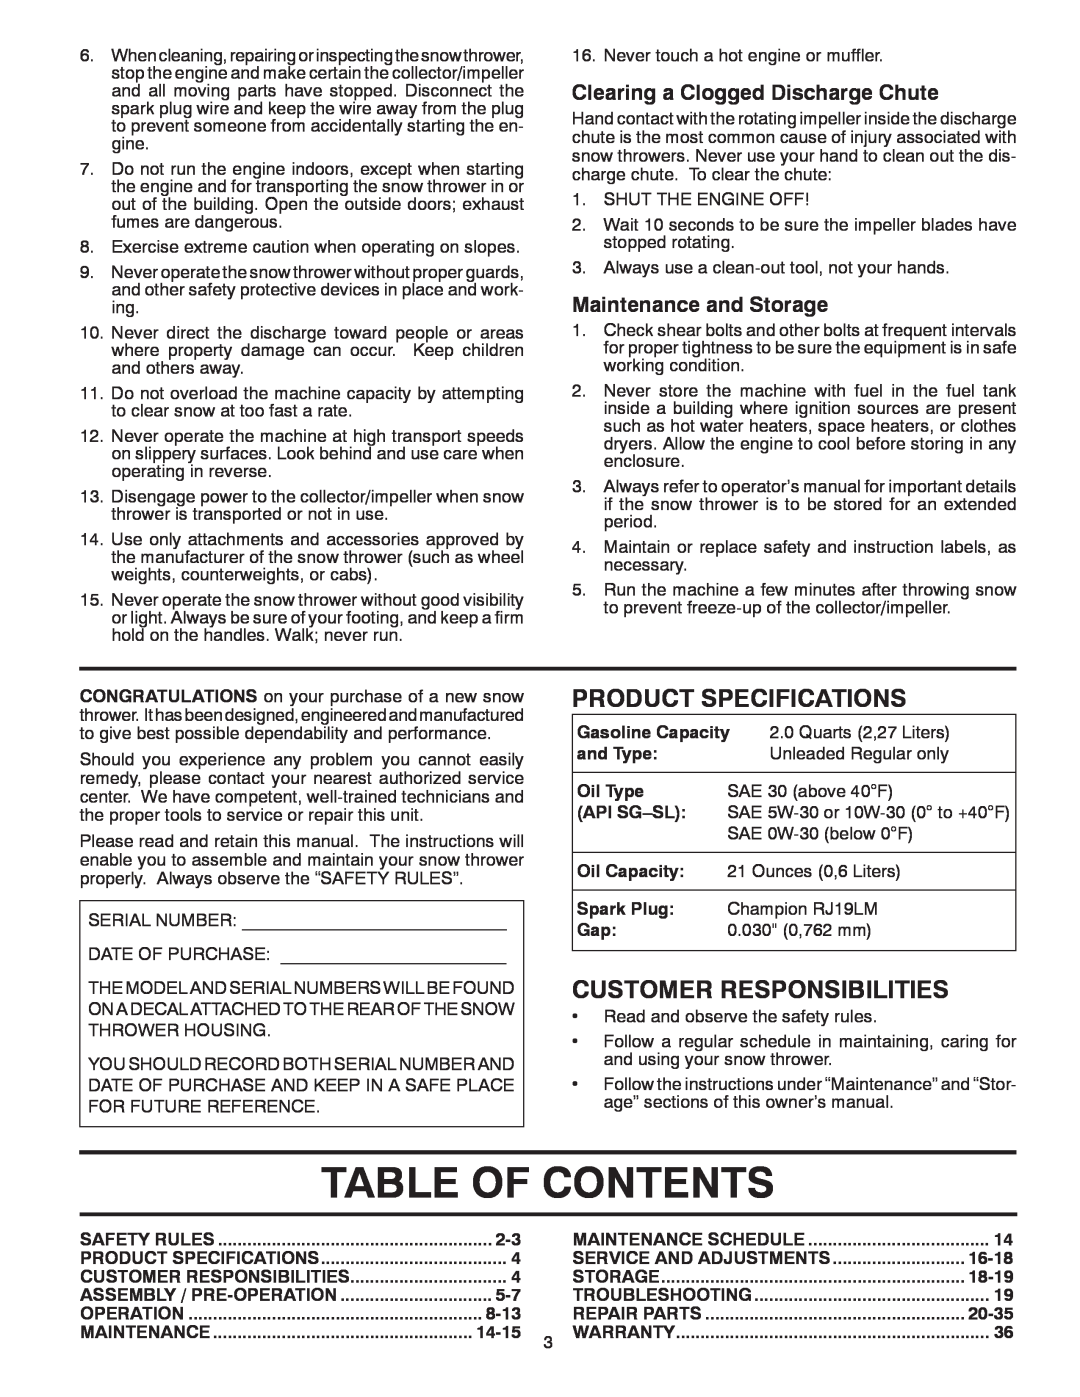 Poulan 421104 Table Of Contents, Product Specifications, Customer Responsibilities, Clearing a Clogged Discharge Chute 